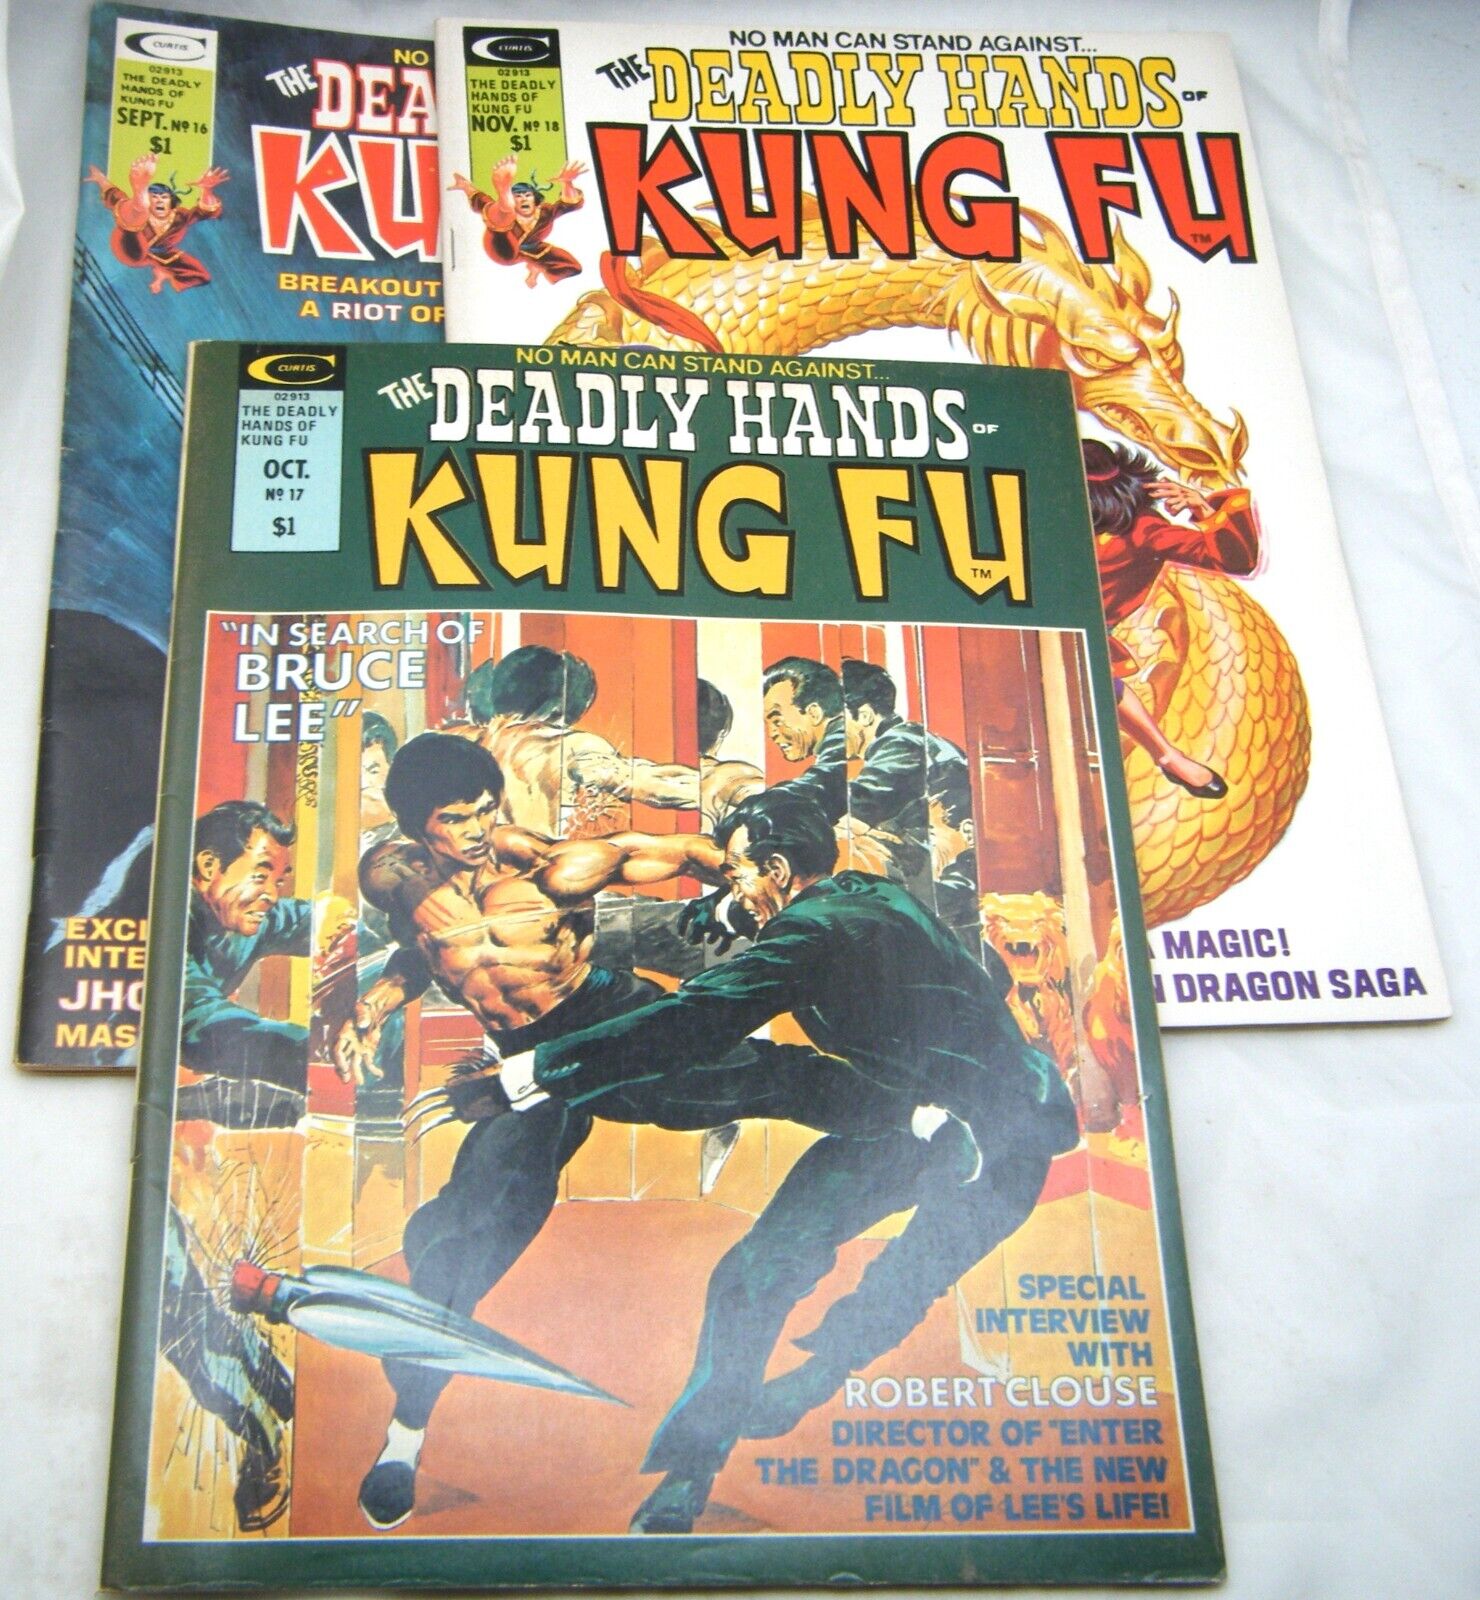 Mixed Lot of 3 The Deadly Hands of Kung Fu Issues 16, 17, 18 Bruce Lee